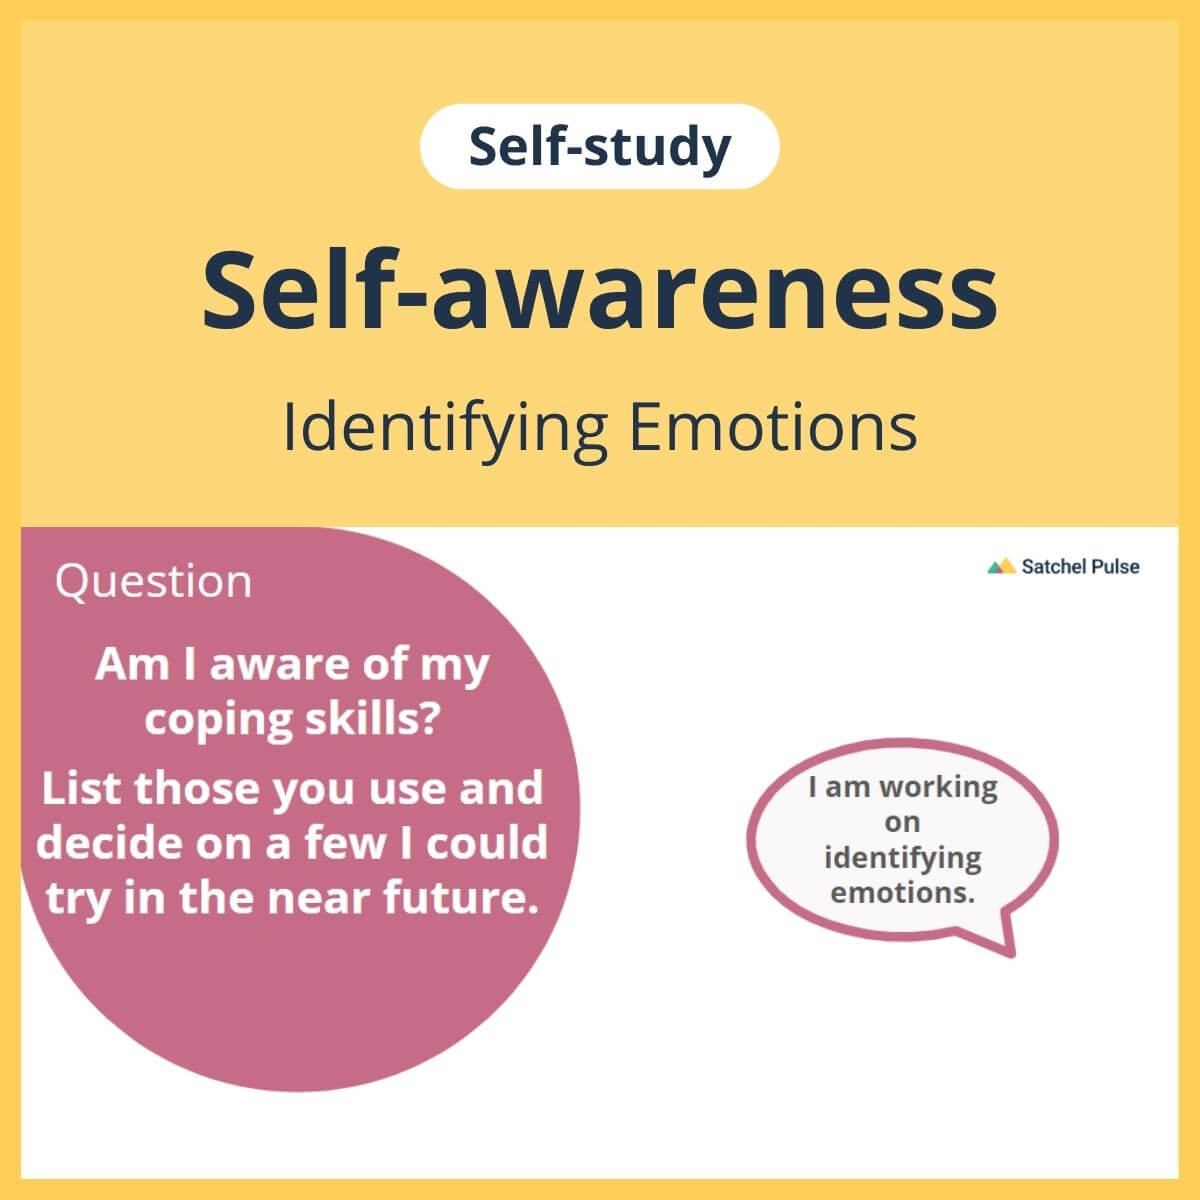 SEL self-study focusing on Identifying Emotions to use in your classroom as one of your SEL activities for Self-Awareness